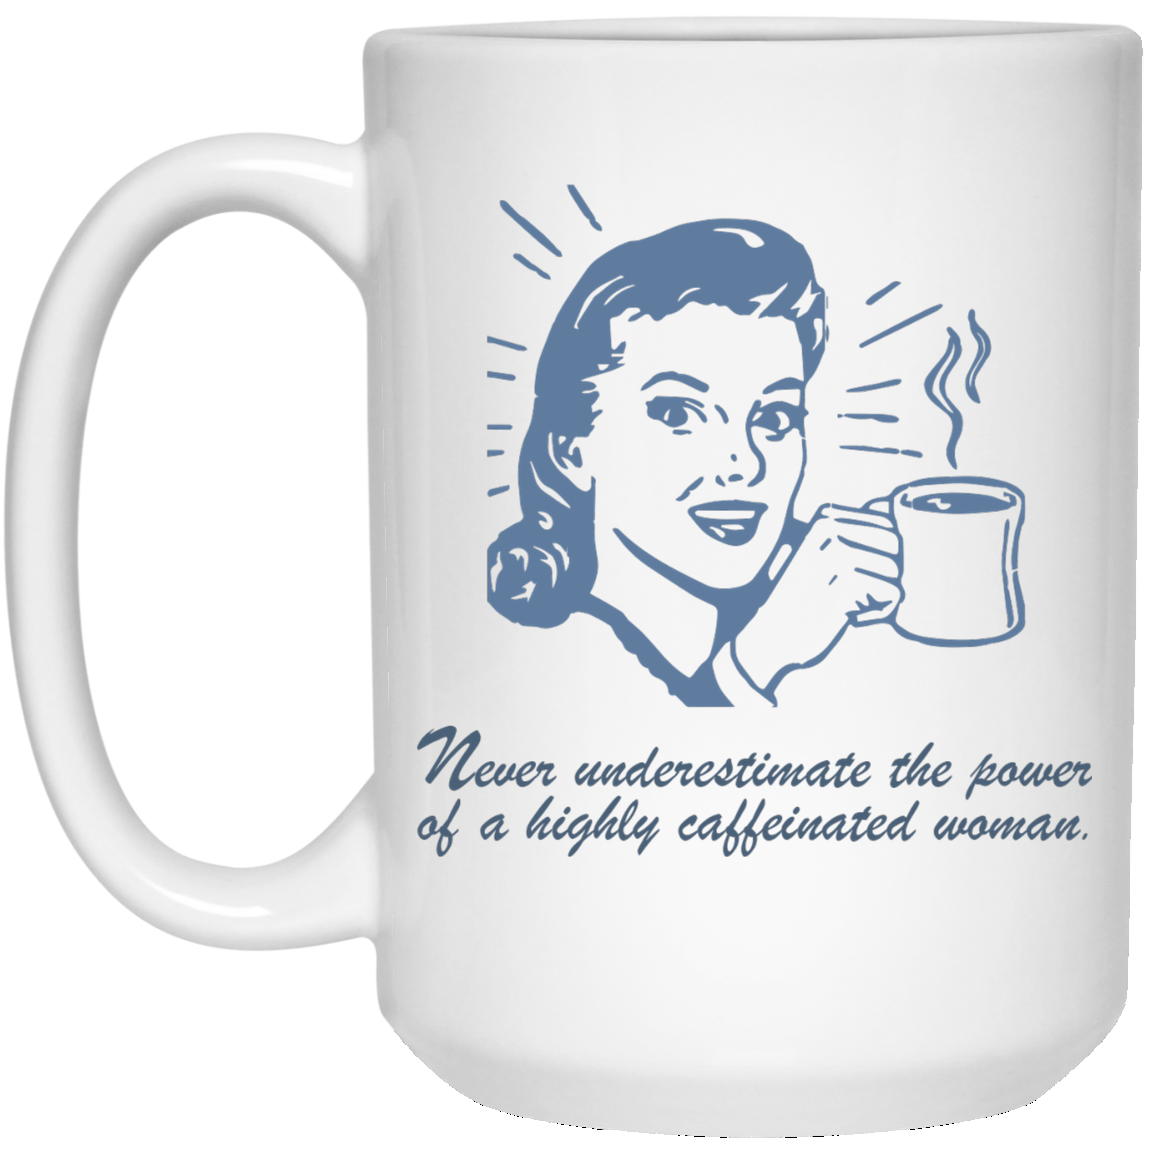 No Spill Mug Vintage The Working Woman's Coffee Cup Travel